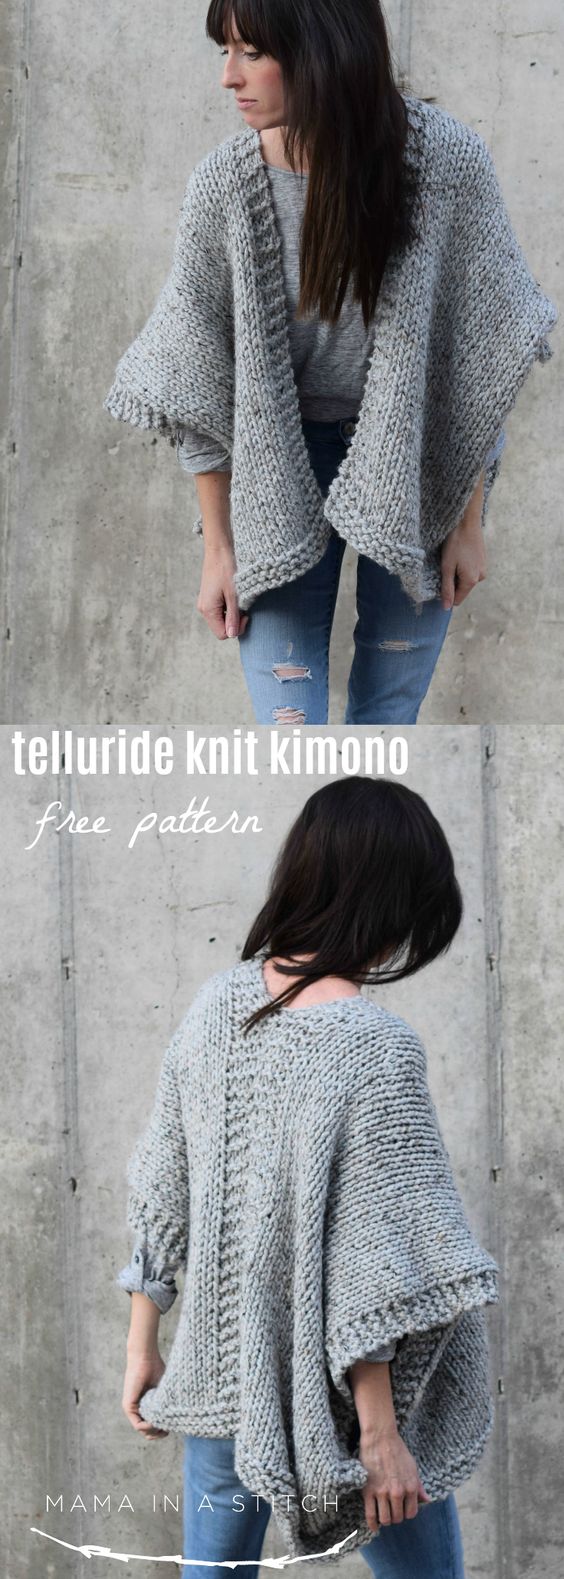 This easy, free knitting pattern for a knit kimono cardigan is so simple and cozy! via @MamaInAStitch